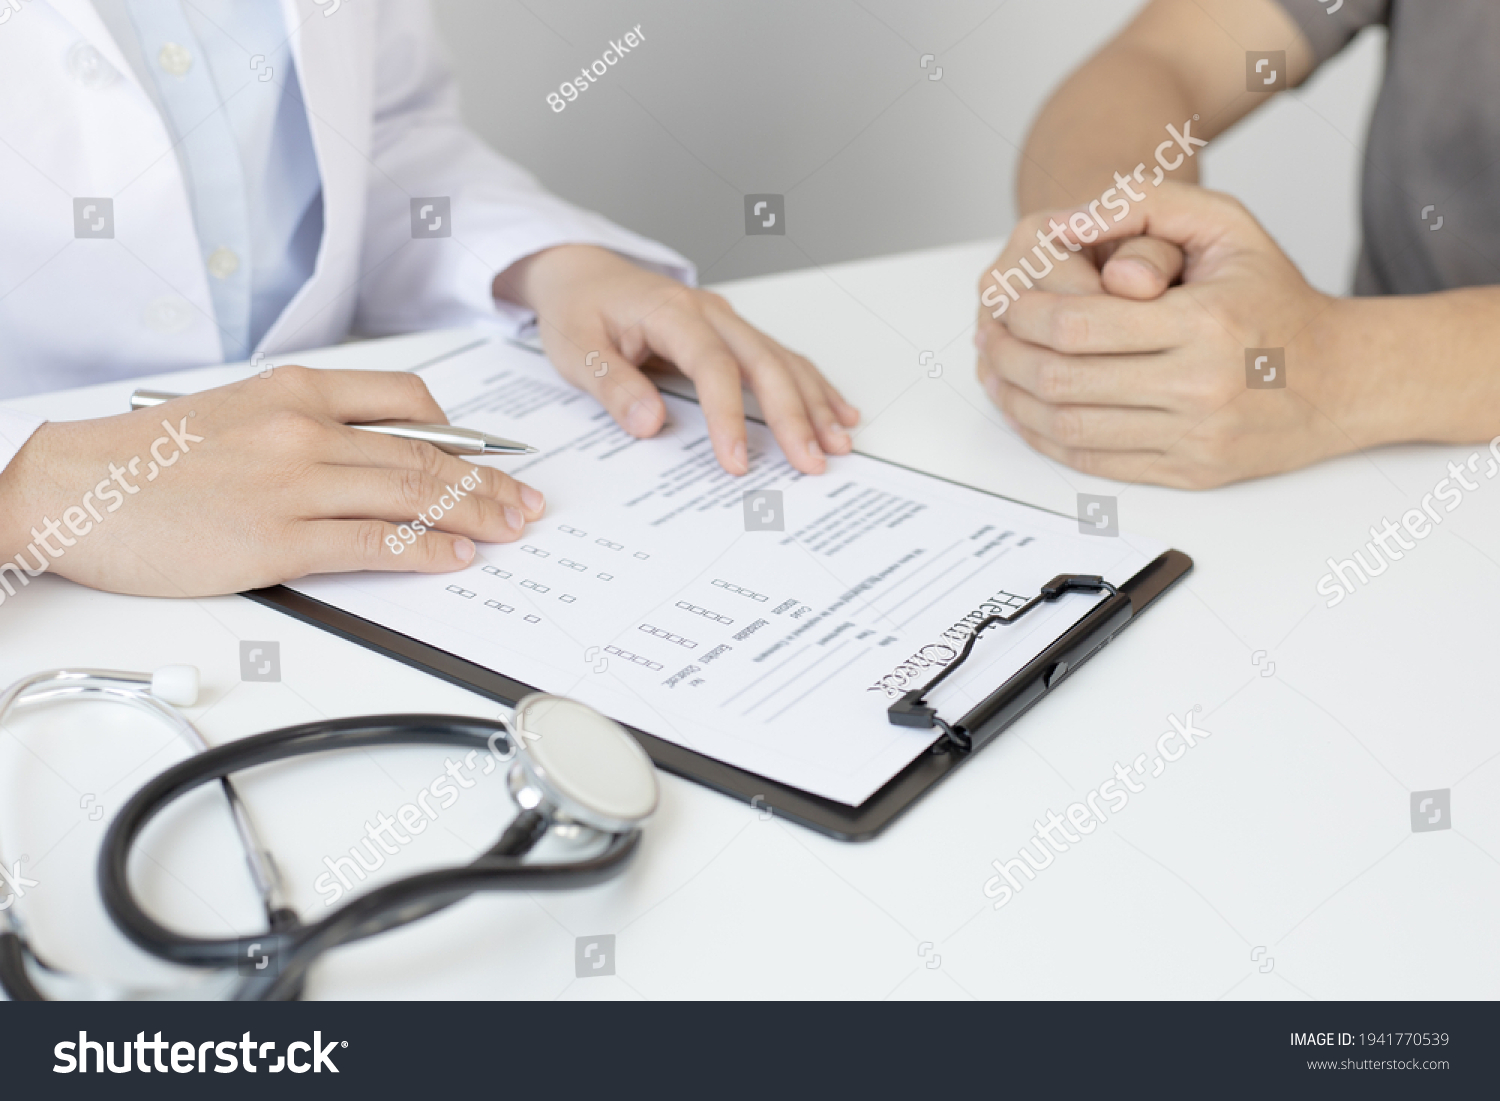 Doctor is currently diagnosing the disease and giving advice to psychiatric patients, Checking the history and medical conditions in a clinic or hospital, Health care counseling. #1941770539